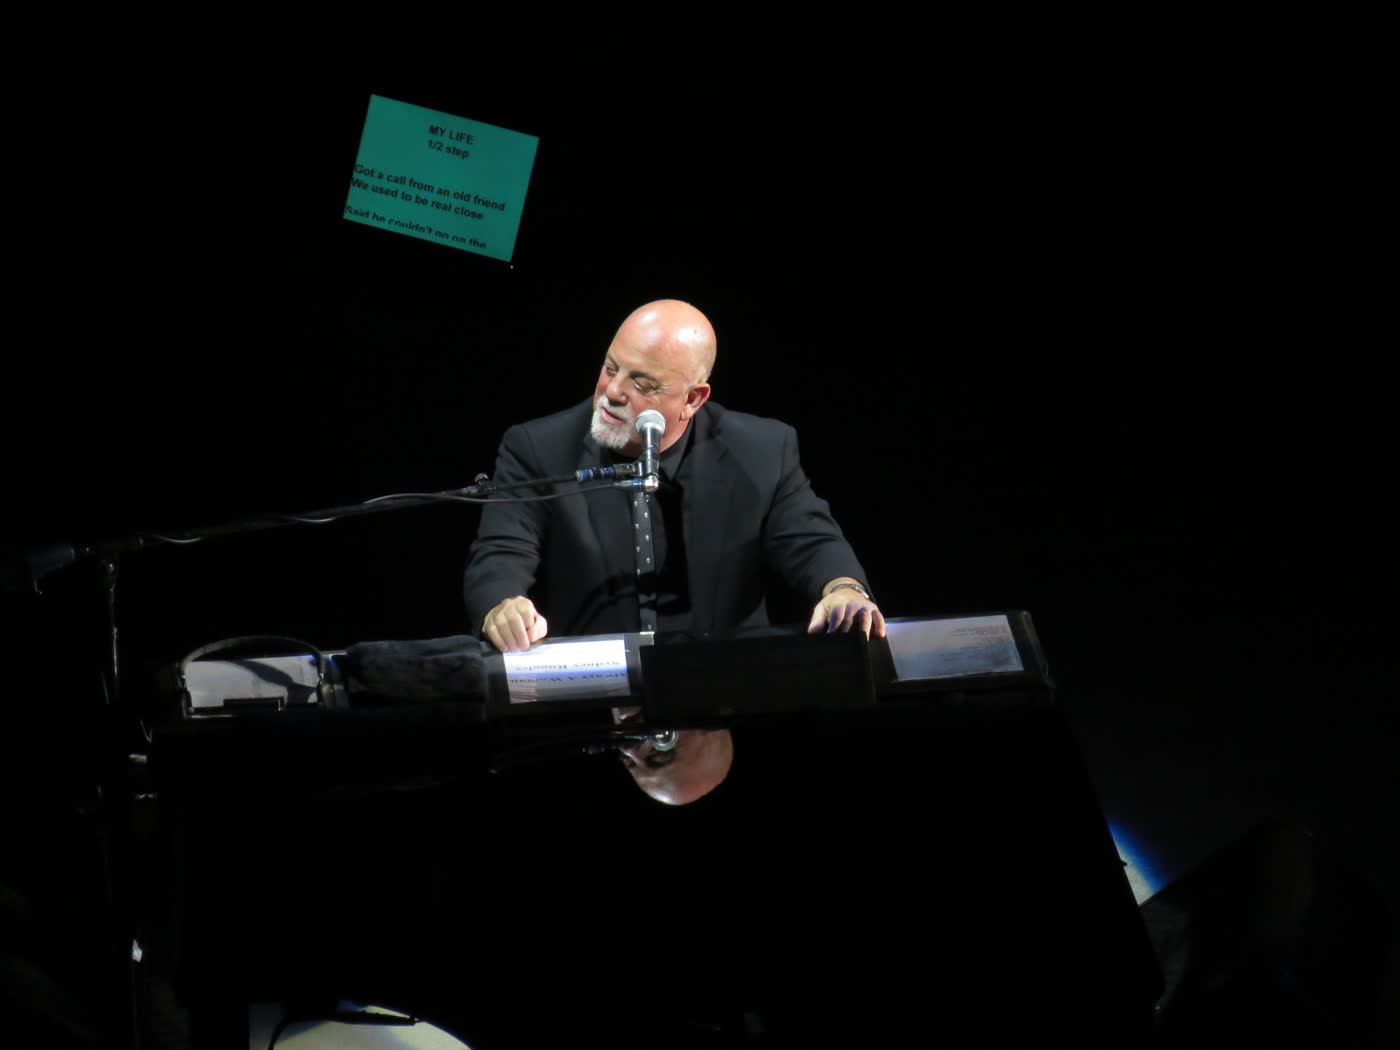 Billy Joel on stage, sitting at the piano.